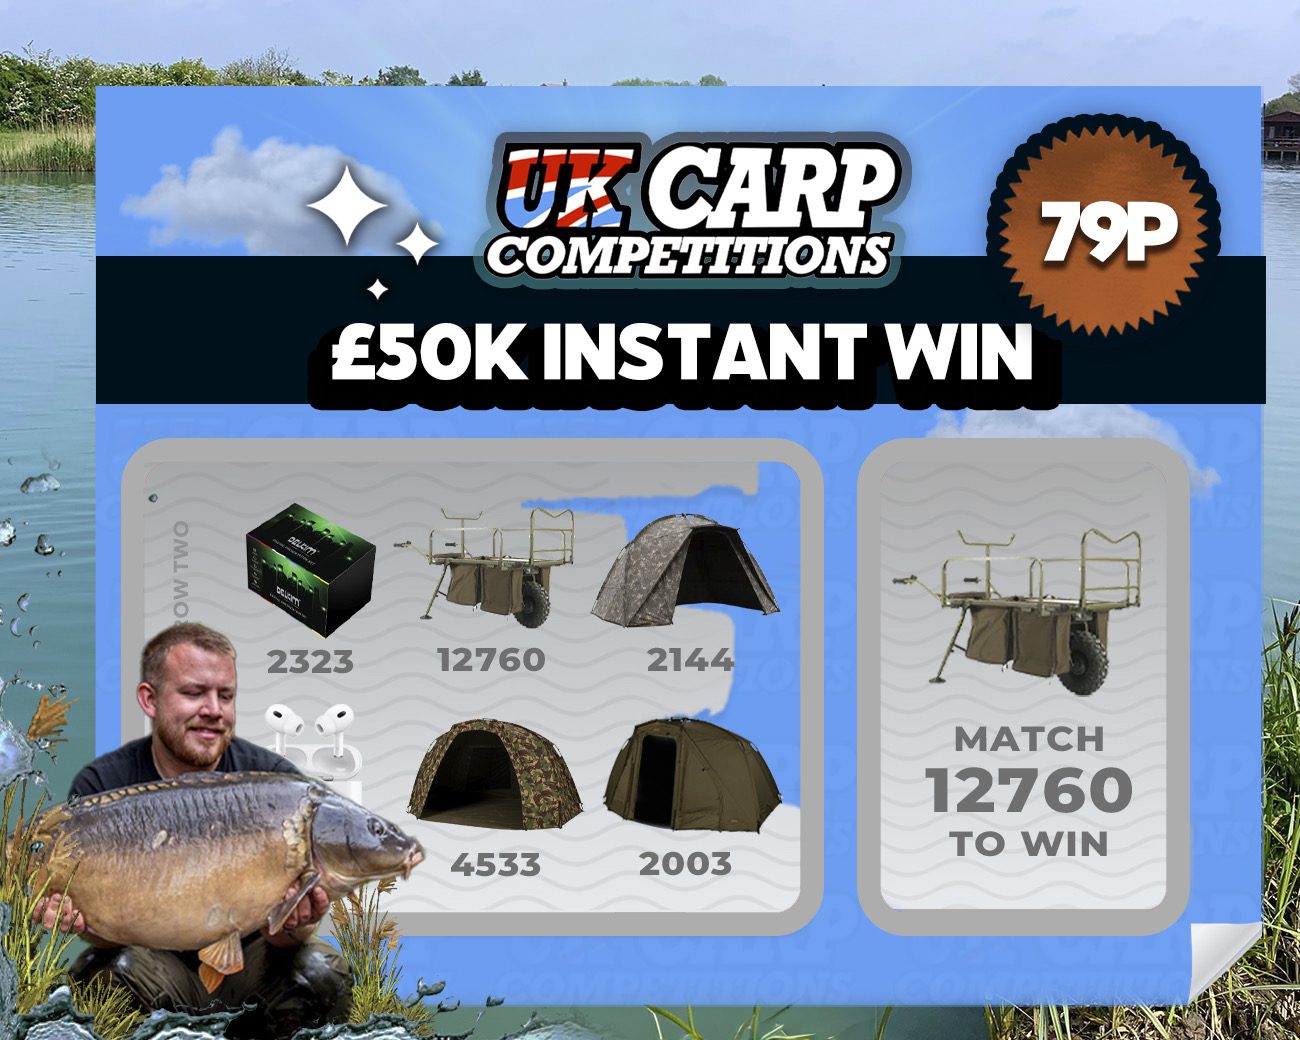 UK Carp Competitions – Carp Fishing Gear Competitions